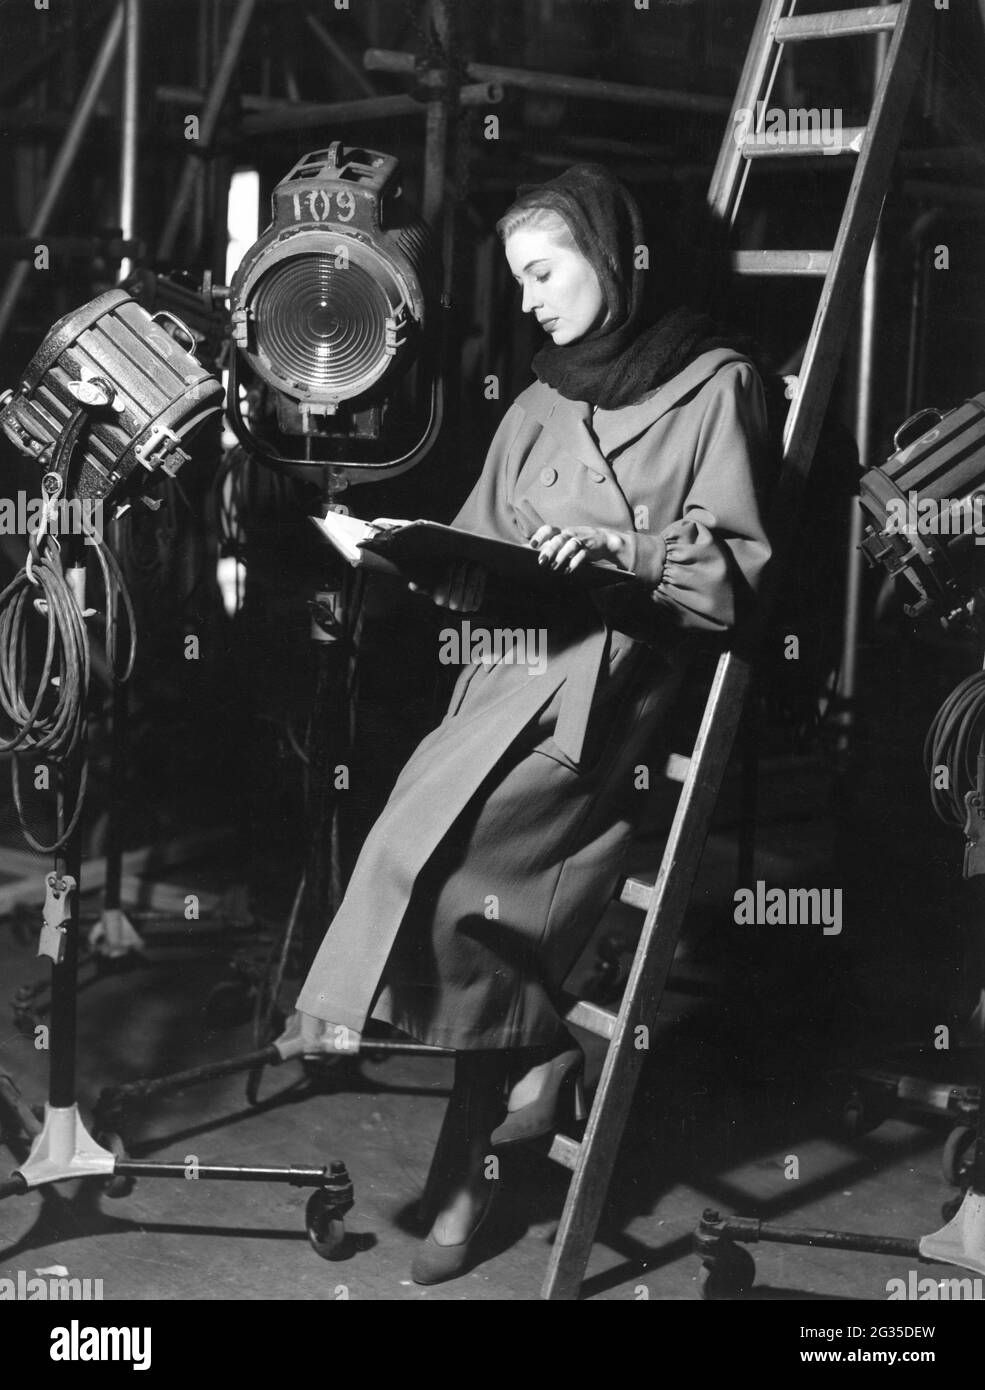 VALERIE HOBSON on set candid checking her script at Denham Studios during filming of THE ROCKING HORSE WINNER 1949 director / screenplay ANTHONY PELISSIER from short story by D.H. Lawrence wardrobe designed by Victor Stiebel producer John Mills Two Cities Films / John Mills productions / J. Arthur Rank Organisation / General Film Distributors (GFD) Stock Photo